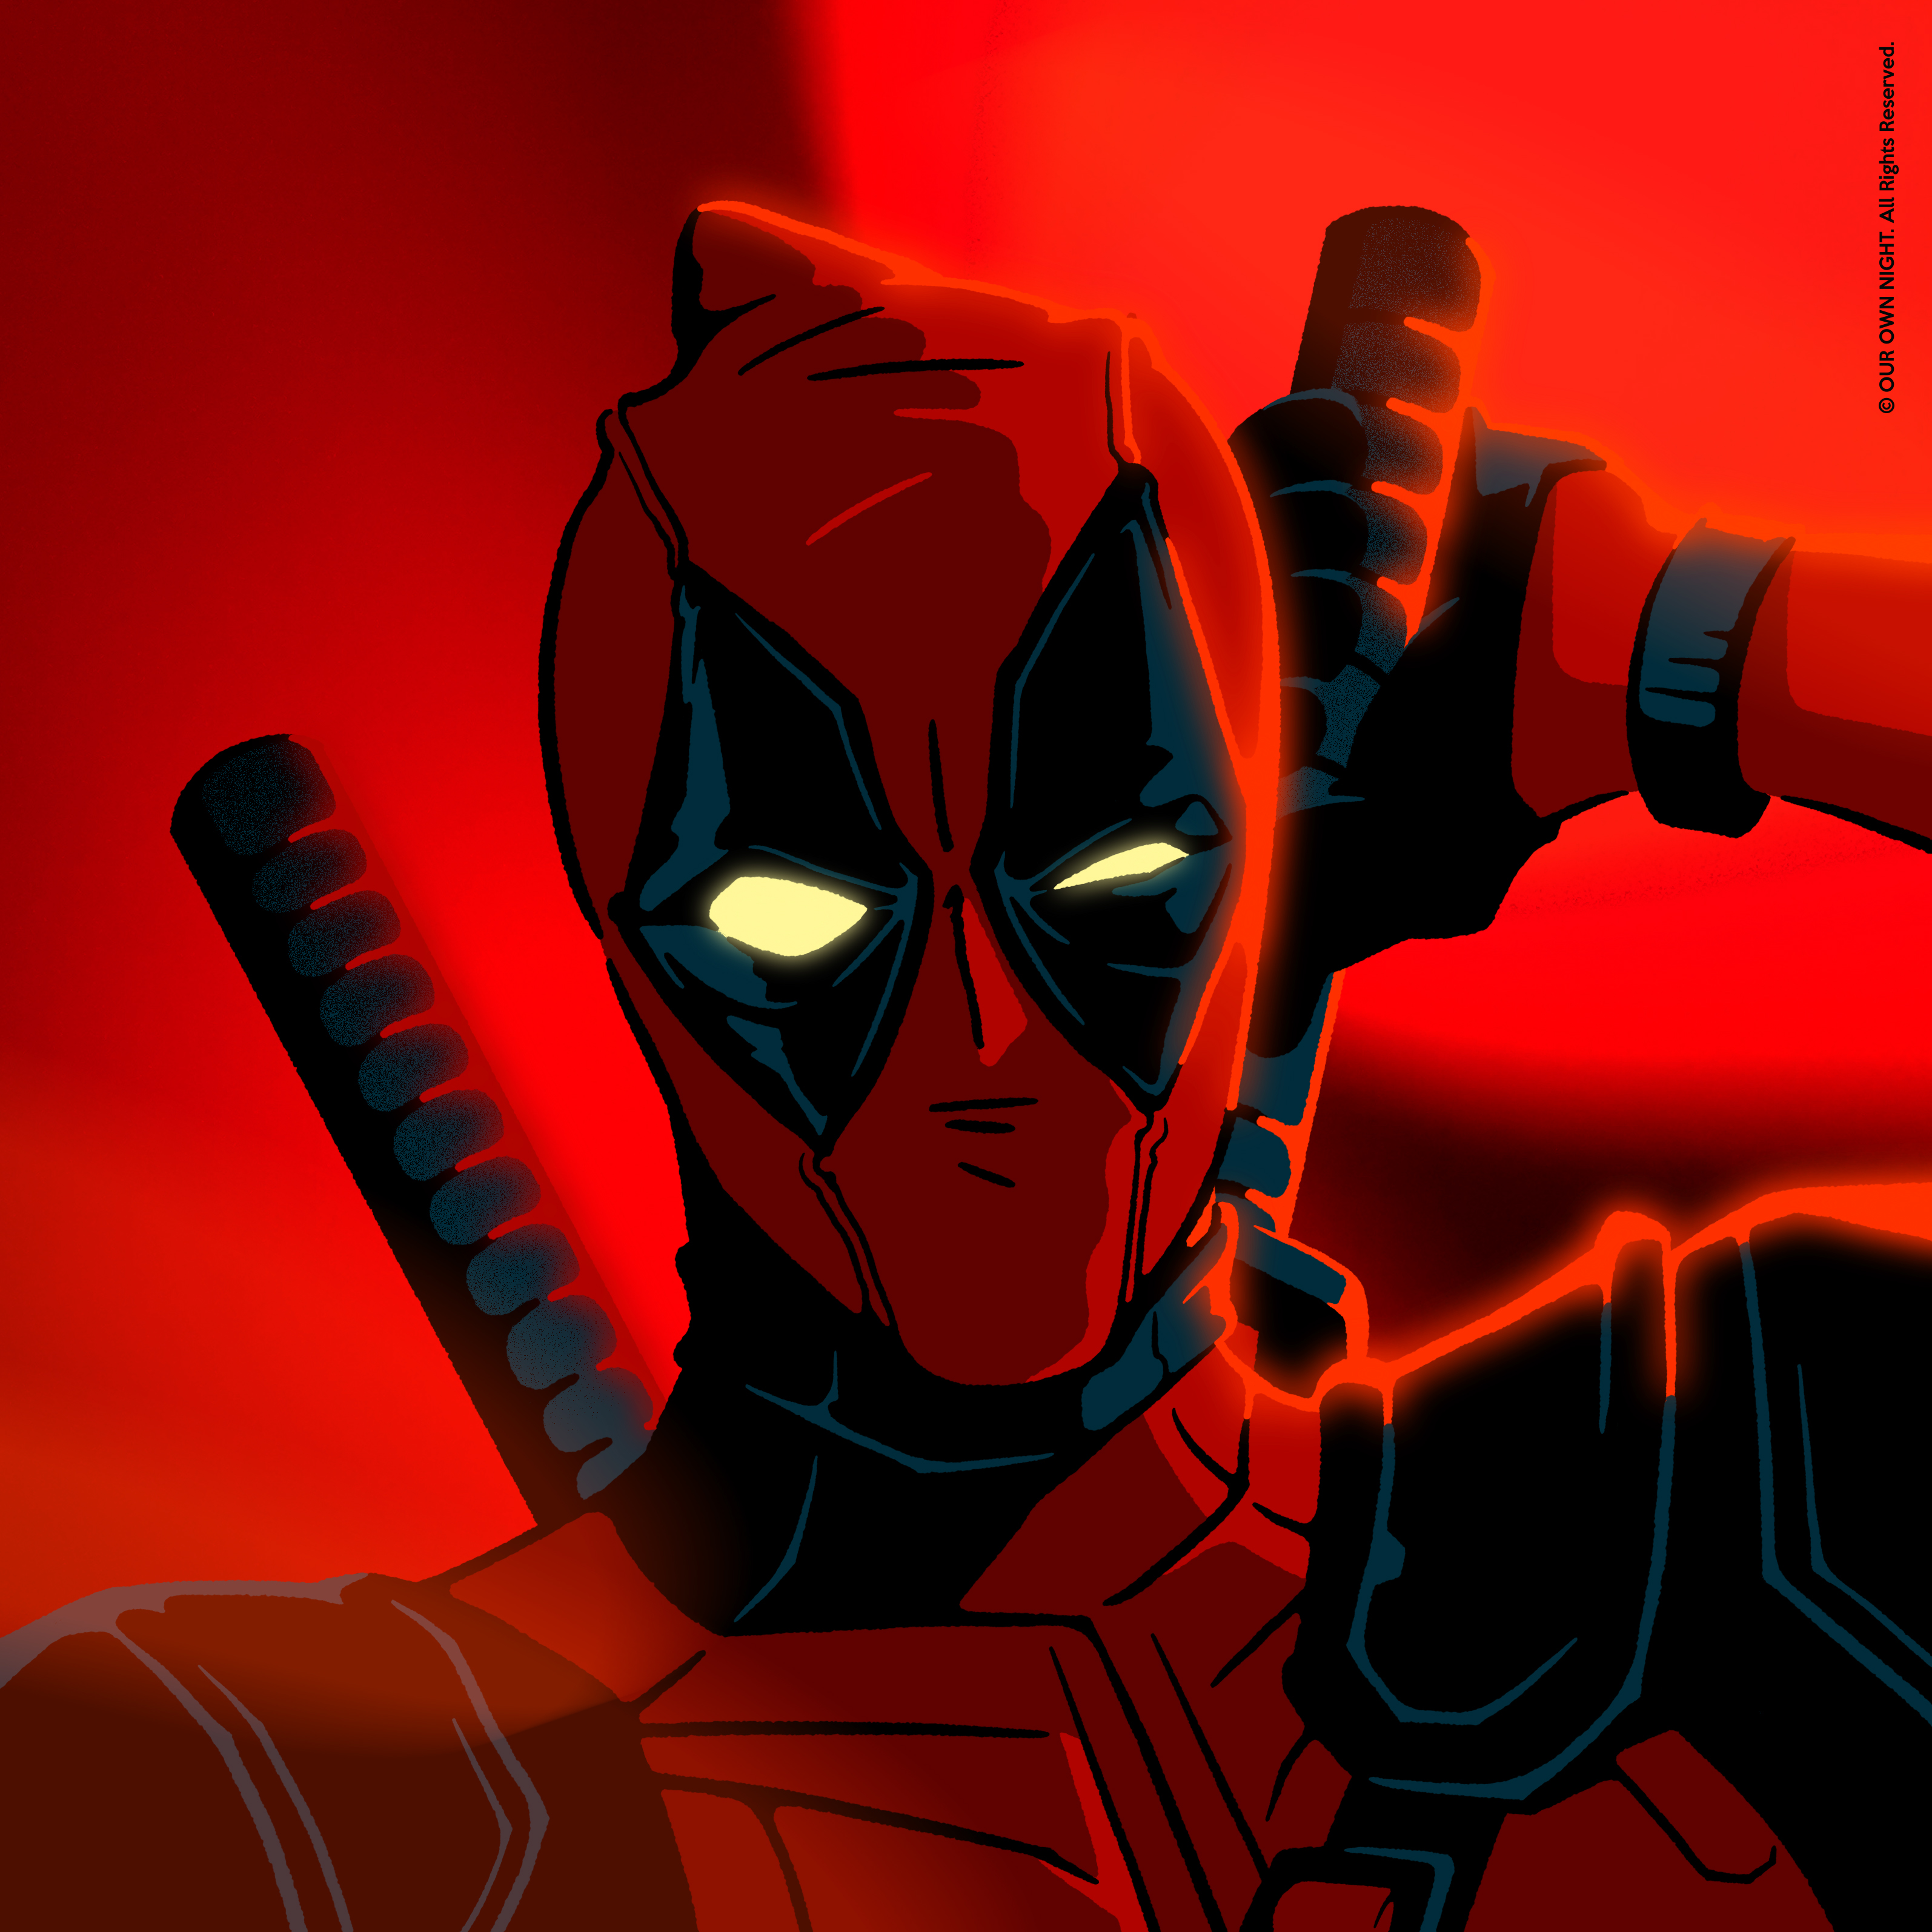 Drawing of Deadpool on a red background